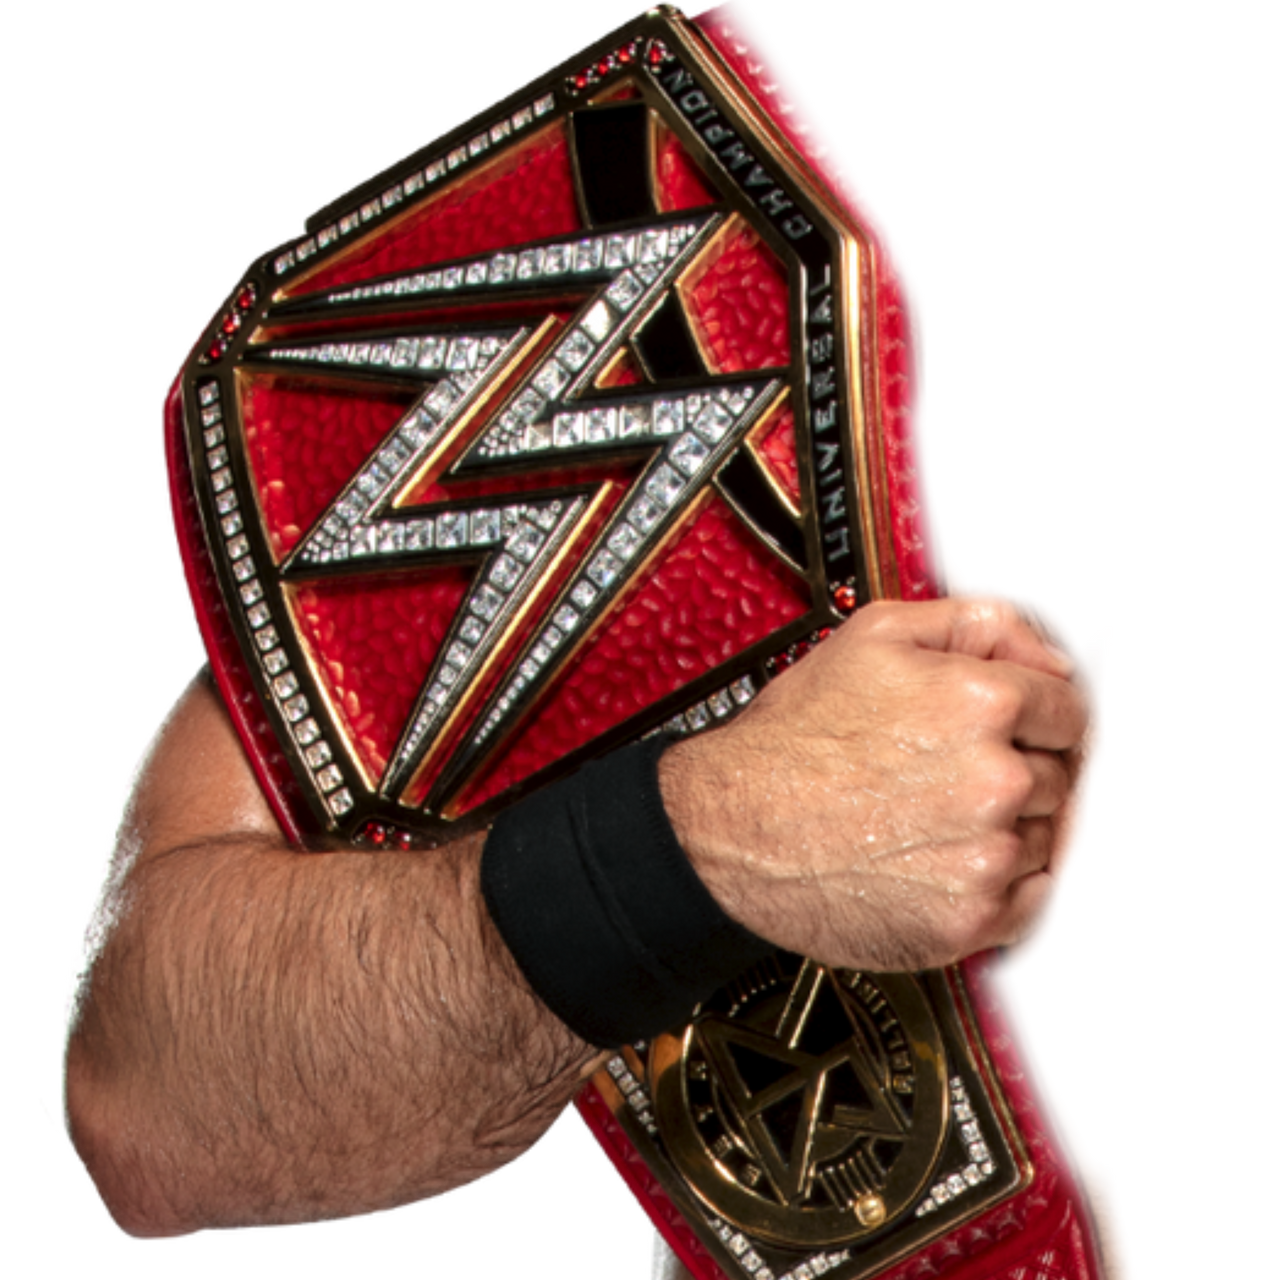 Universal Championship In Hand Png 1 By Wwejoshuasrenders On Deviantart